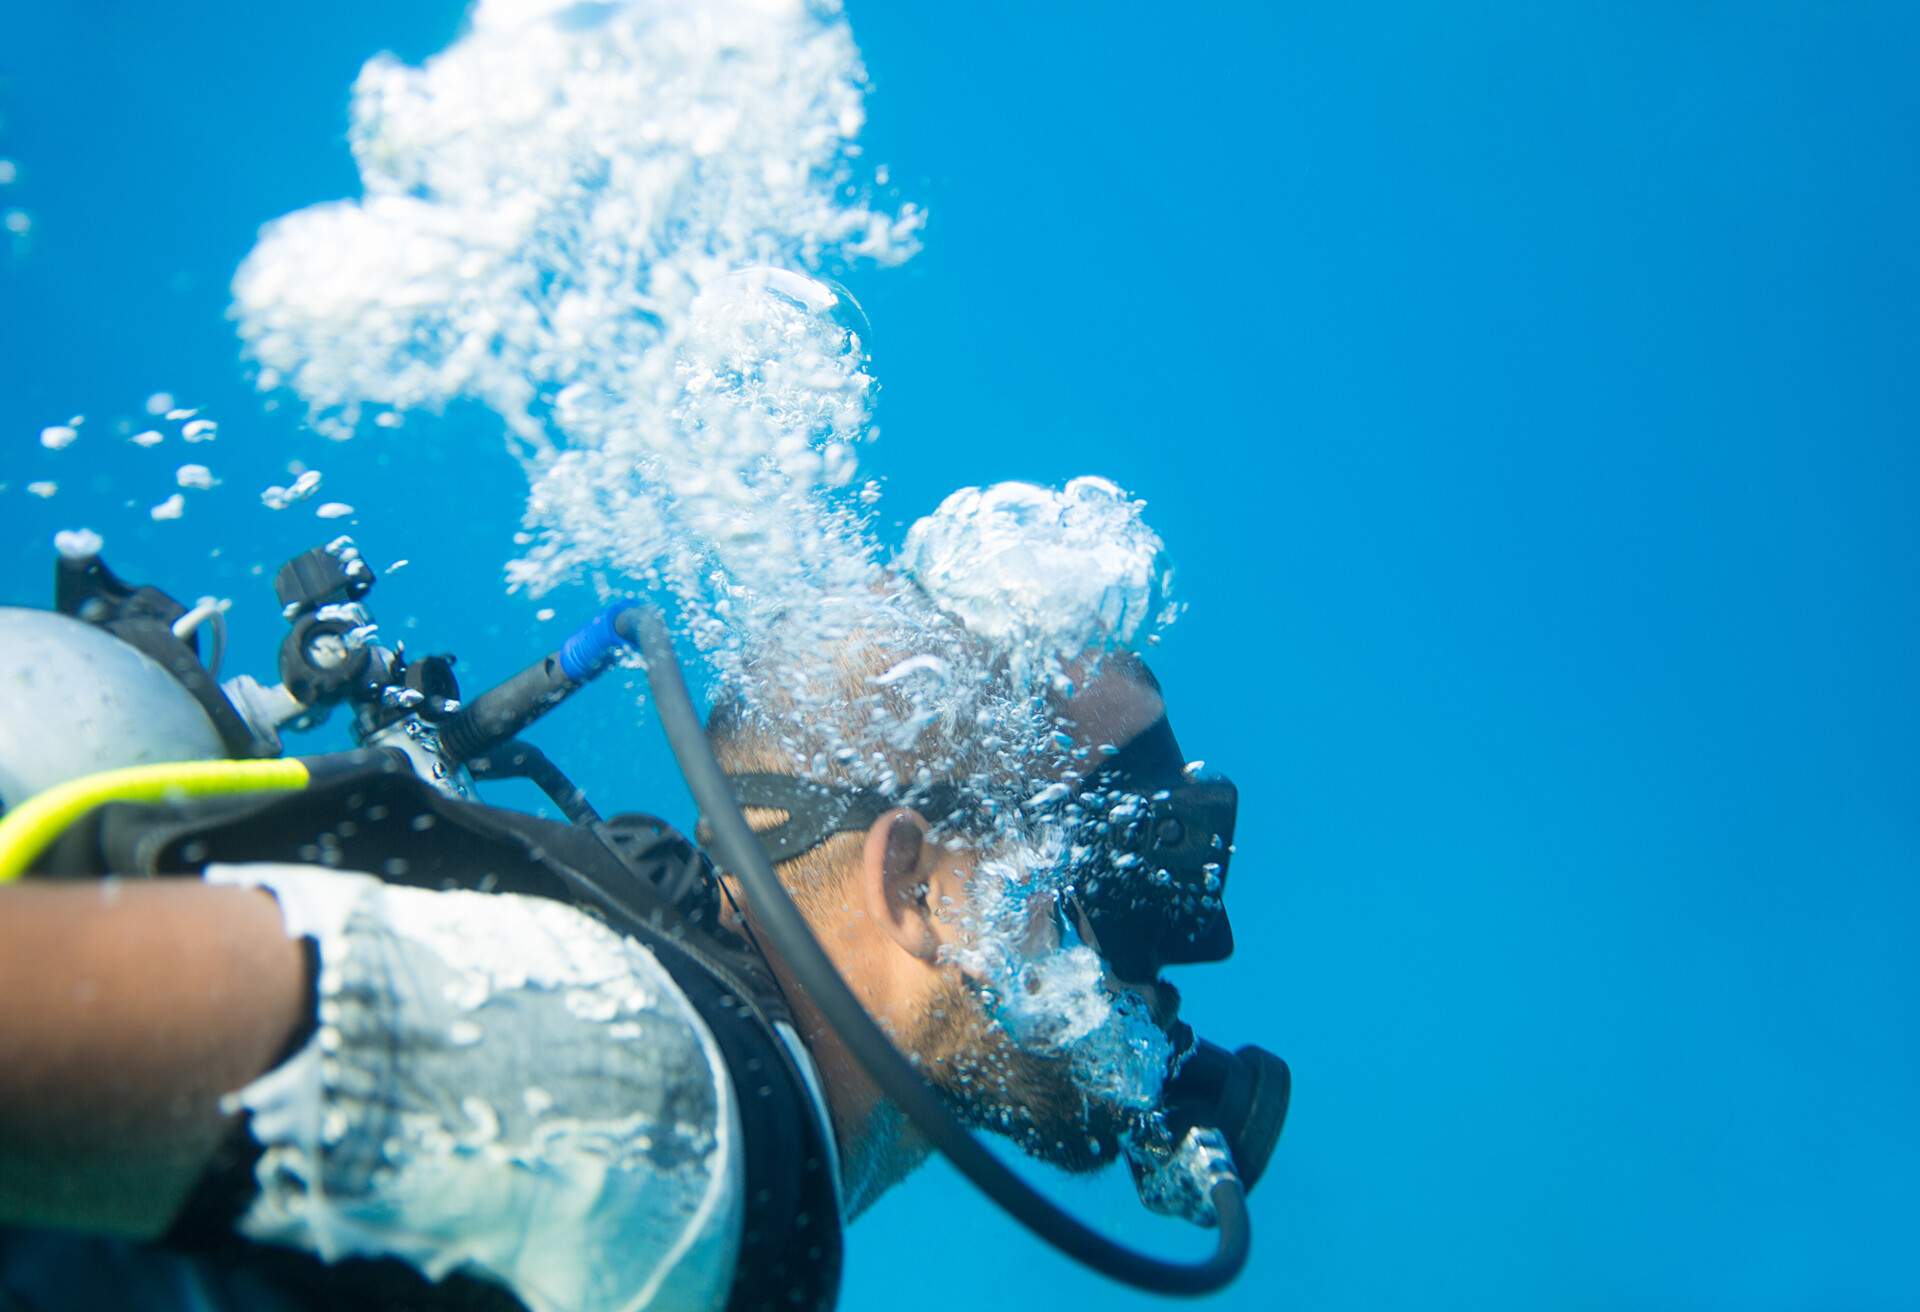 A scuba diver swims in the deep turquoise crystal clear water creating air bubbles.